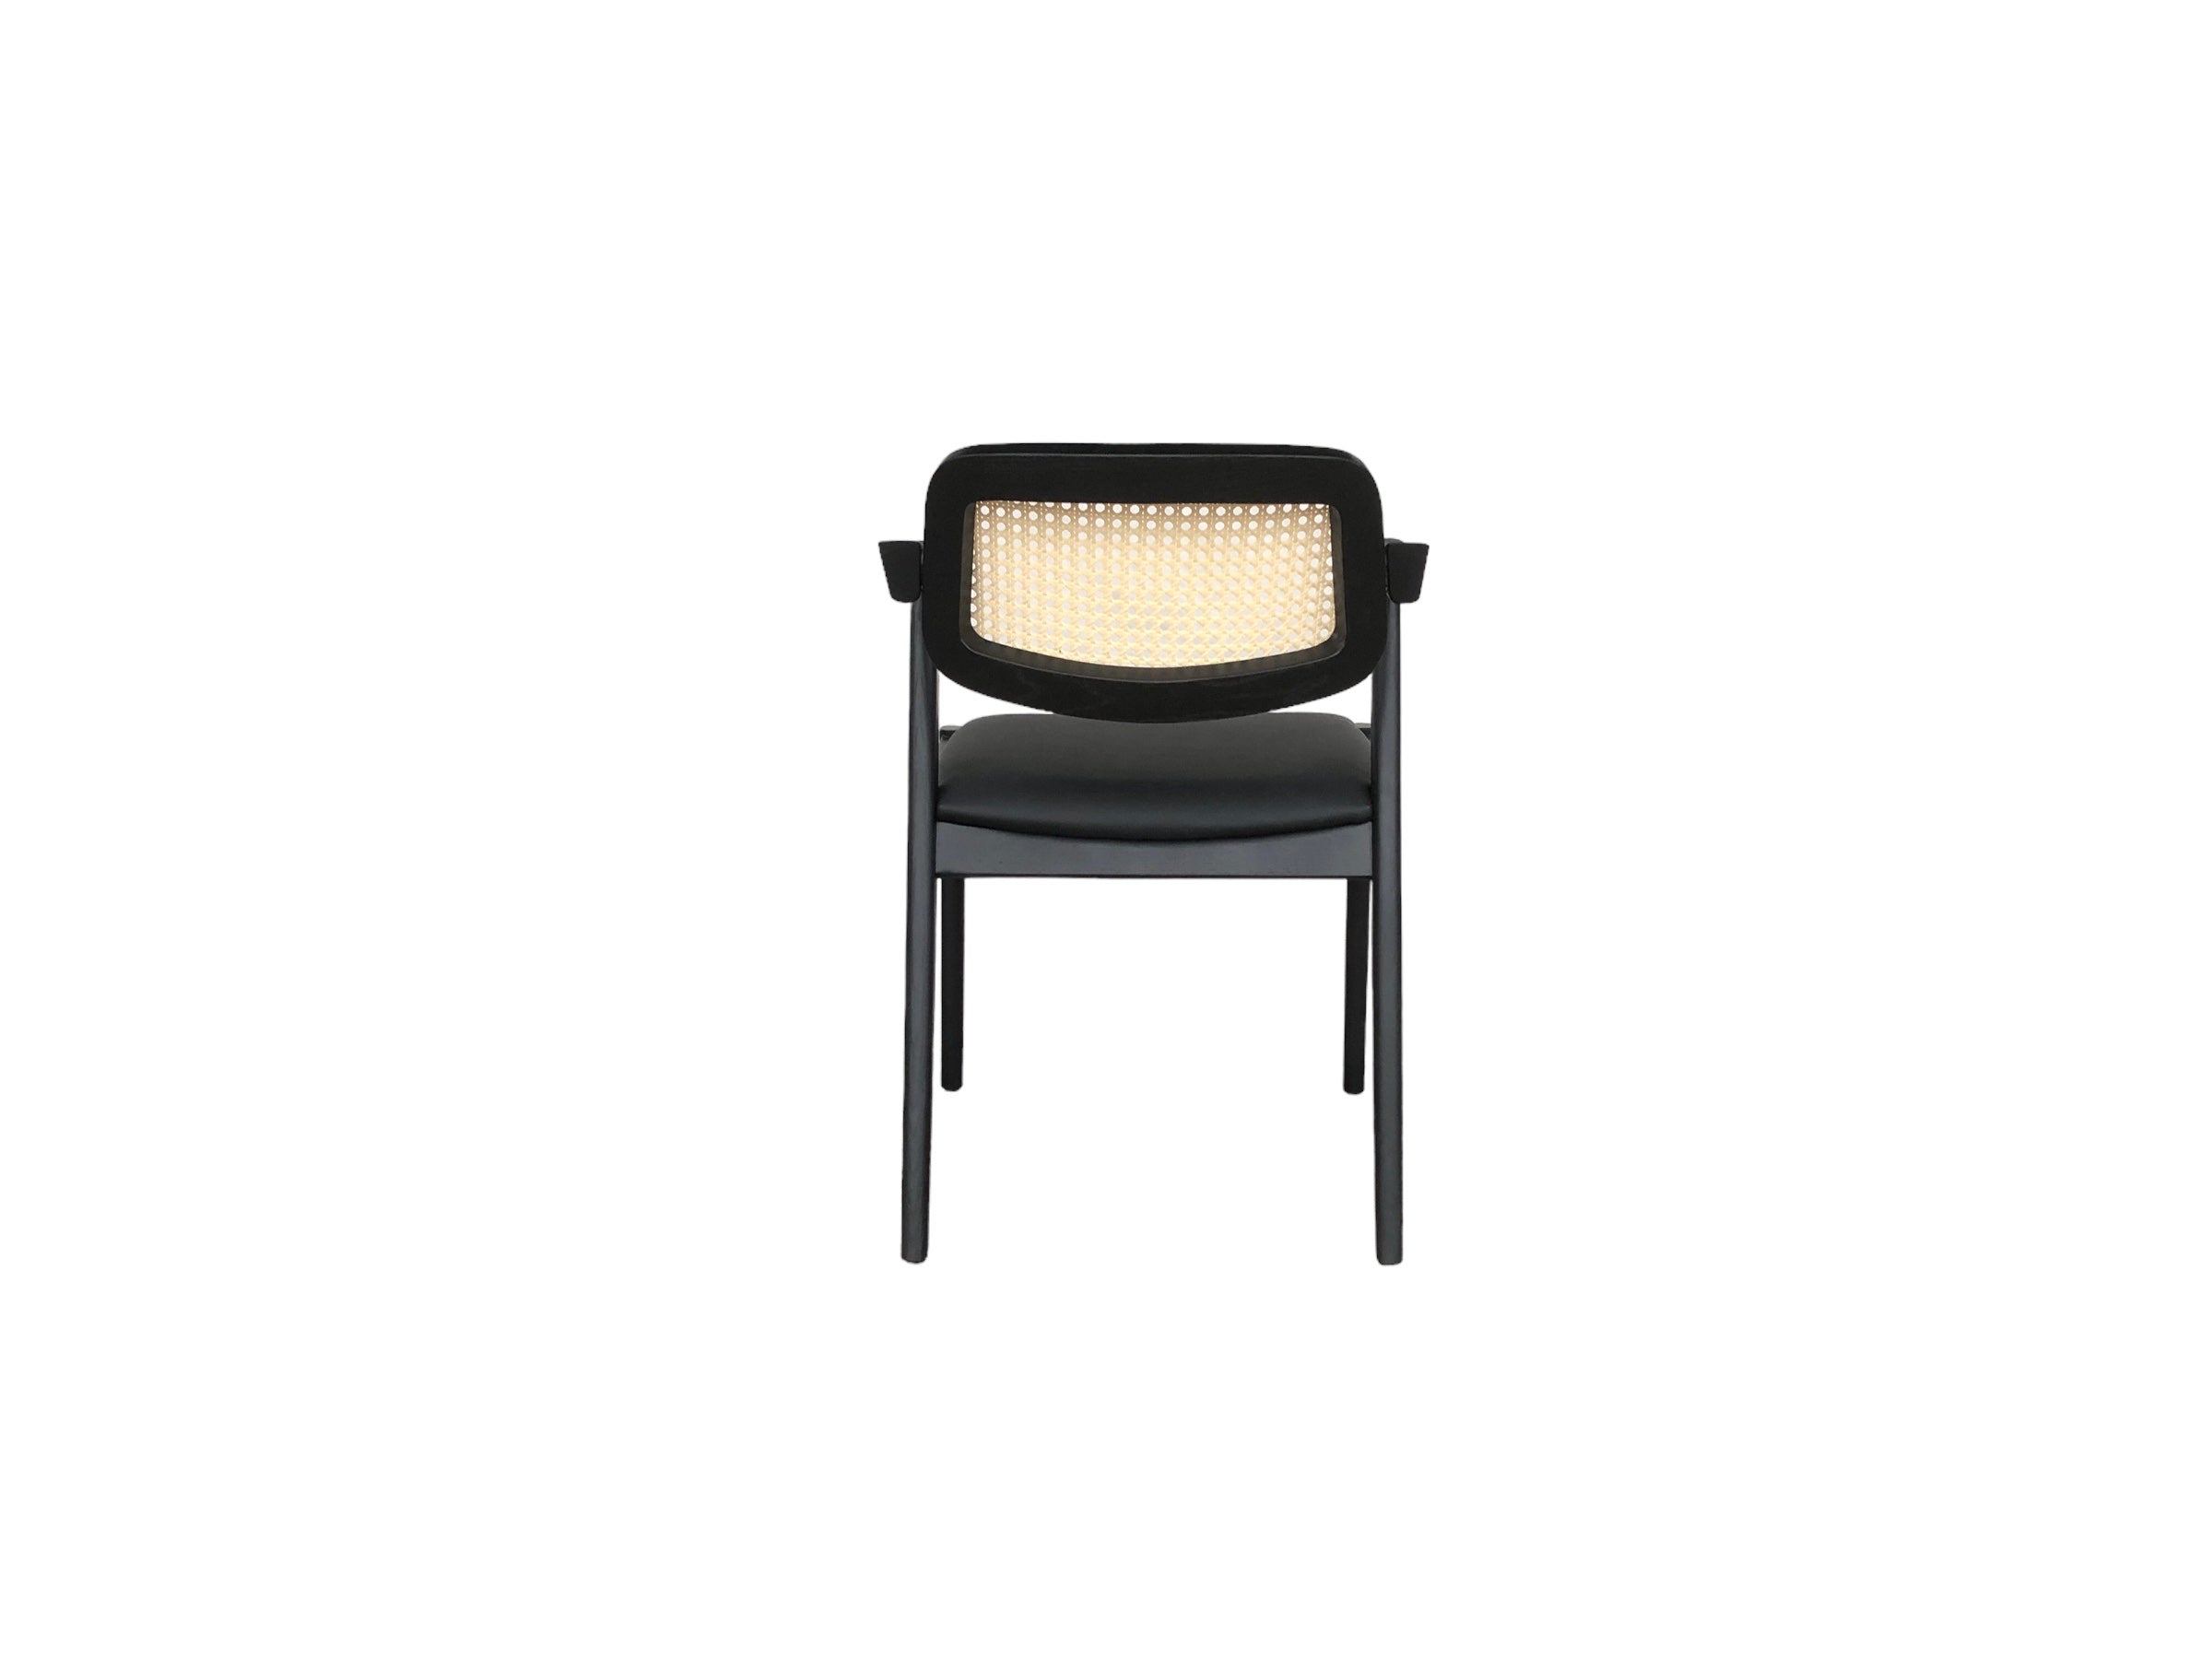 Hilary Dining Chair - Black - Set of 2